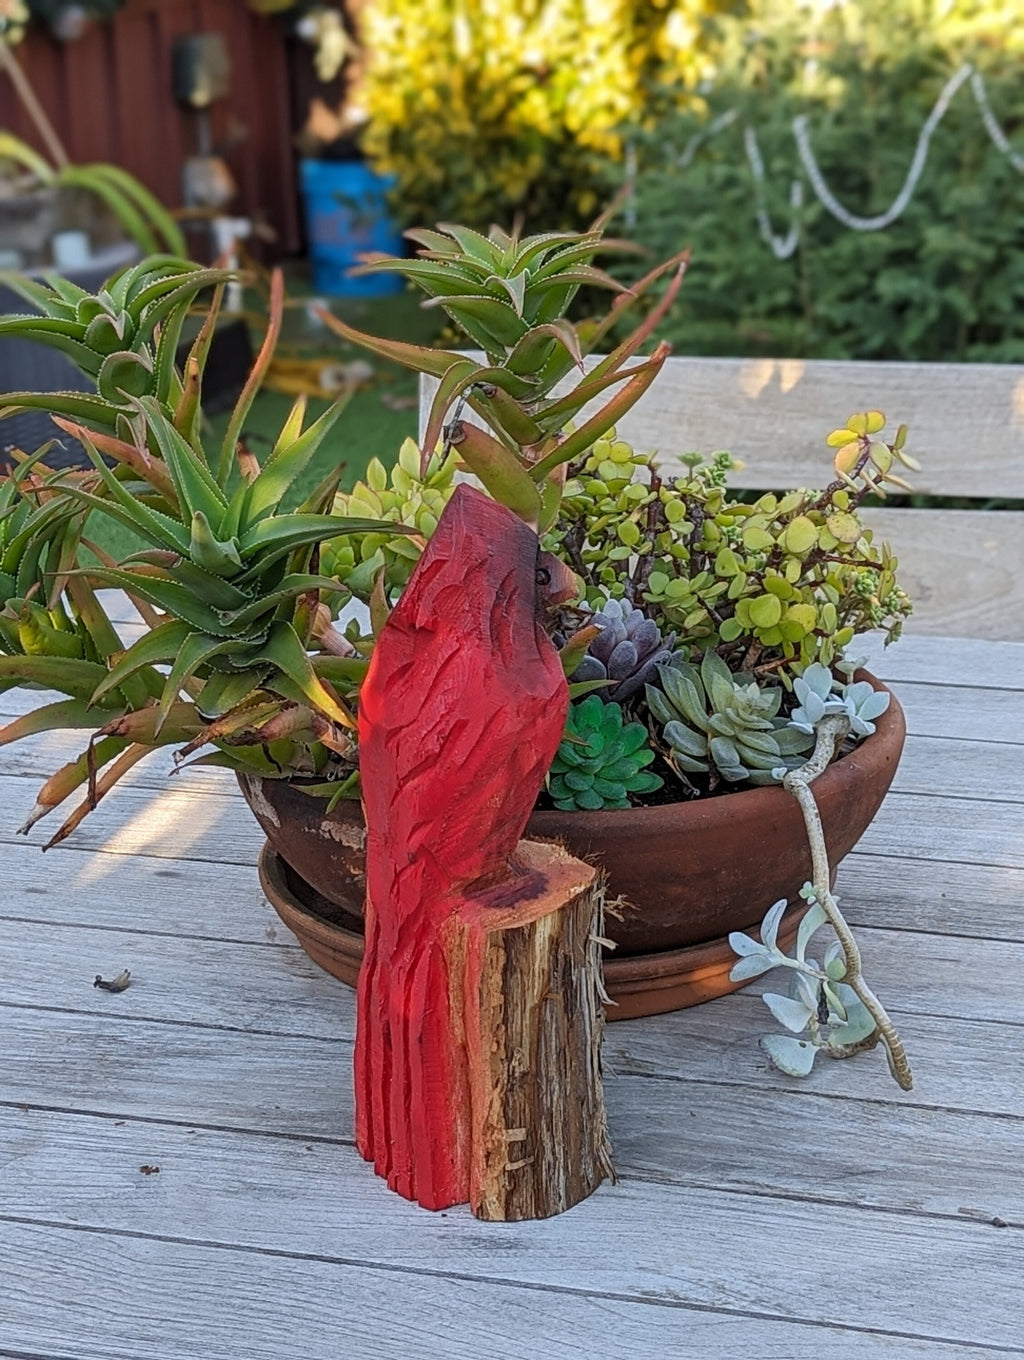 Handmade Northern Cardinal | Home Decor or Yard Art Made in the USA by Wood Chainsaw Artist in Texas